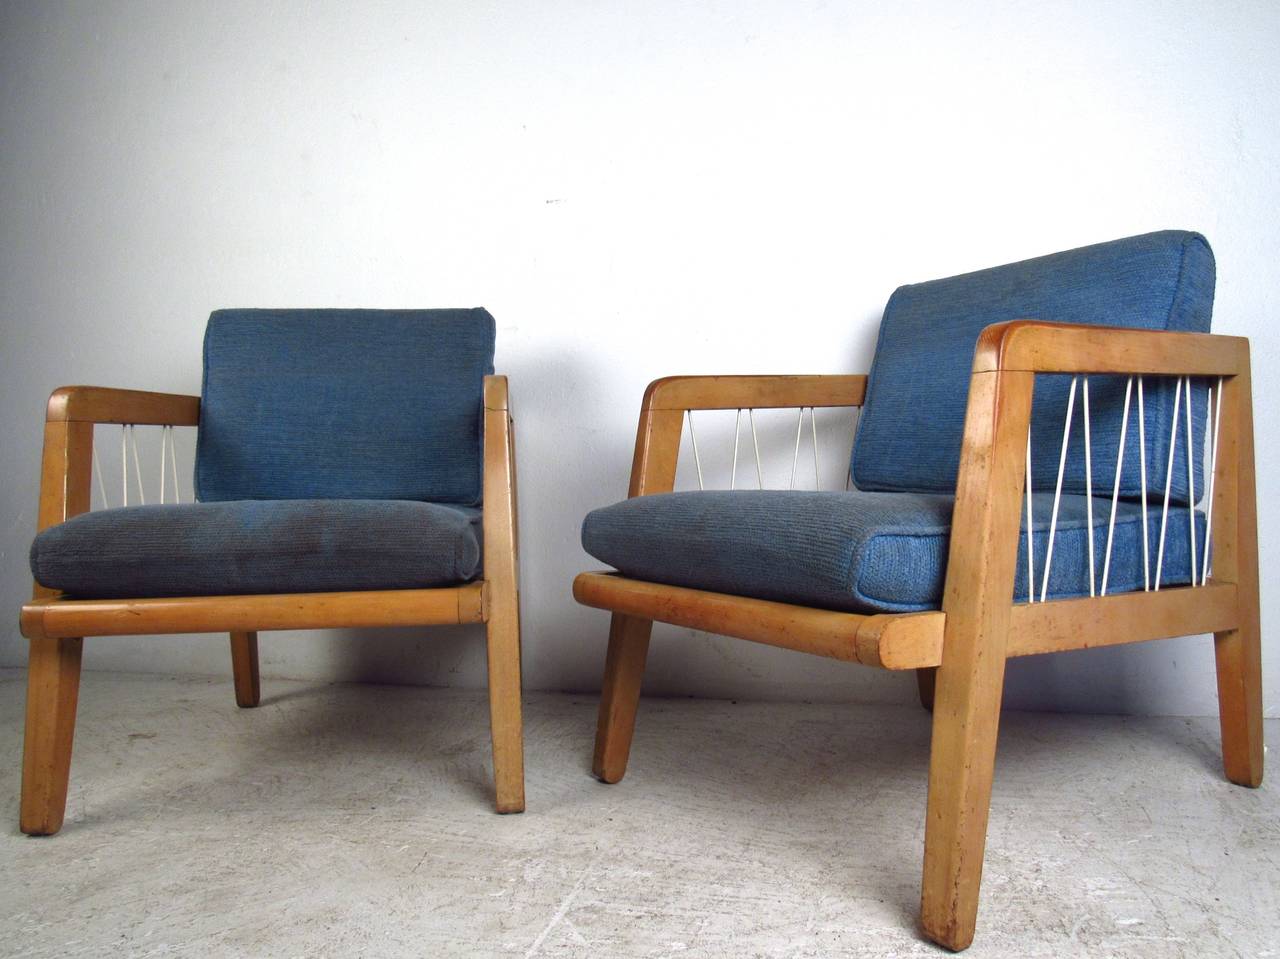 Mid-20th Century Pair of Edward Wormley Club Chairs for Drexel, c. 1947